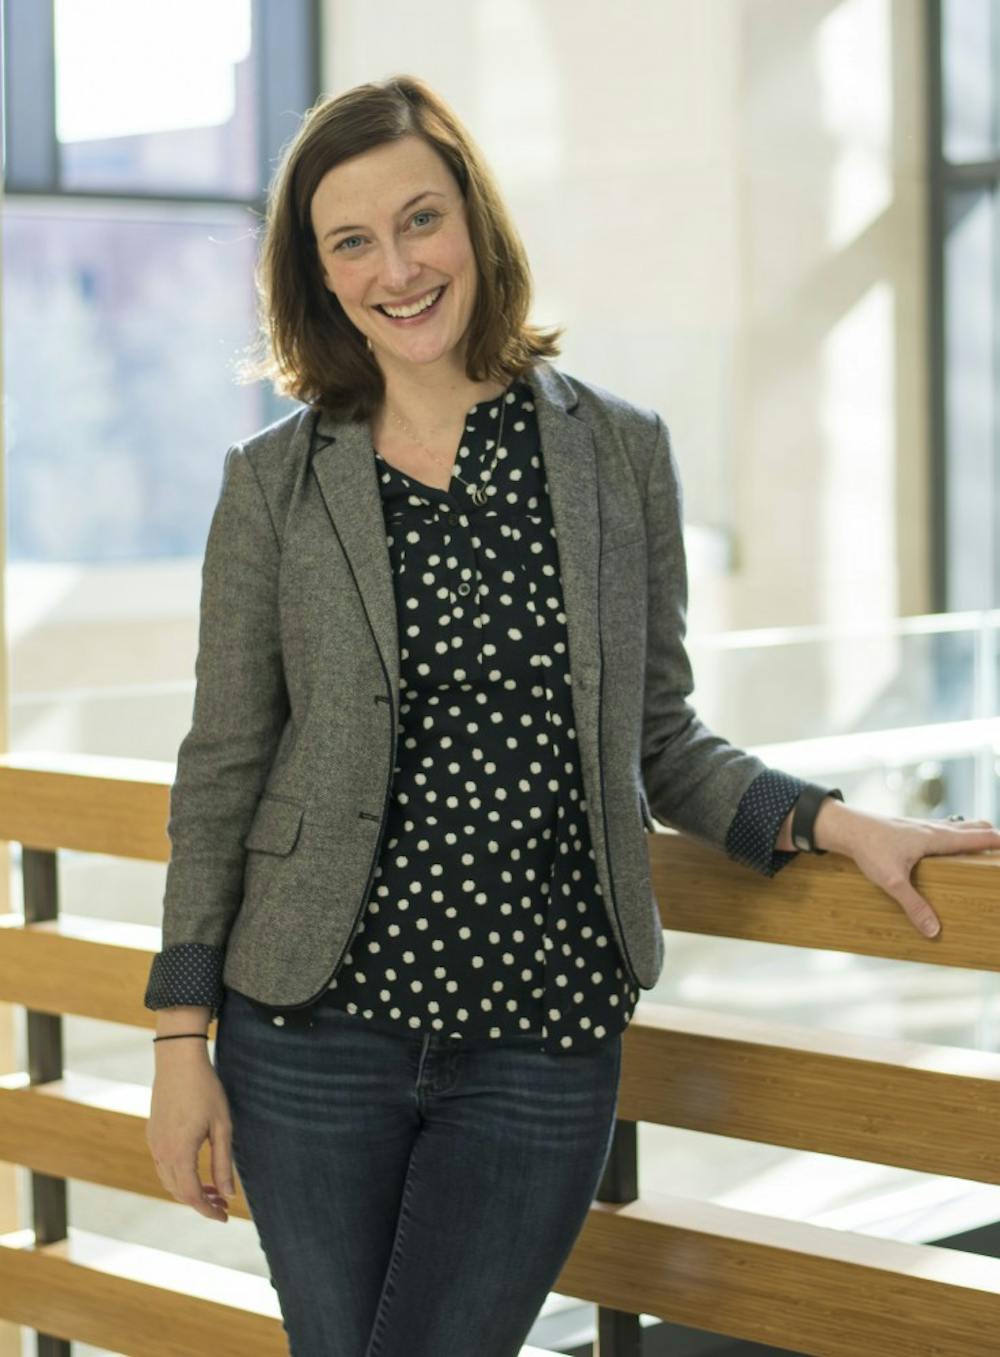 <p>Kristen McCauliff, an a assistant professor of communication studies, received the Ball State 2015 Outstanding Teaching Award. McCauliff has been teaching at Ball State for seven years now.<em>&nbsp;</em><i style="background-color: initial;">DN PHOTO SAMANTHA BRAMMER</i></p>